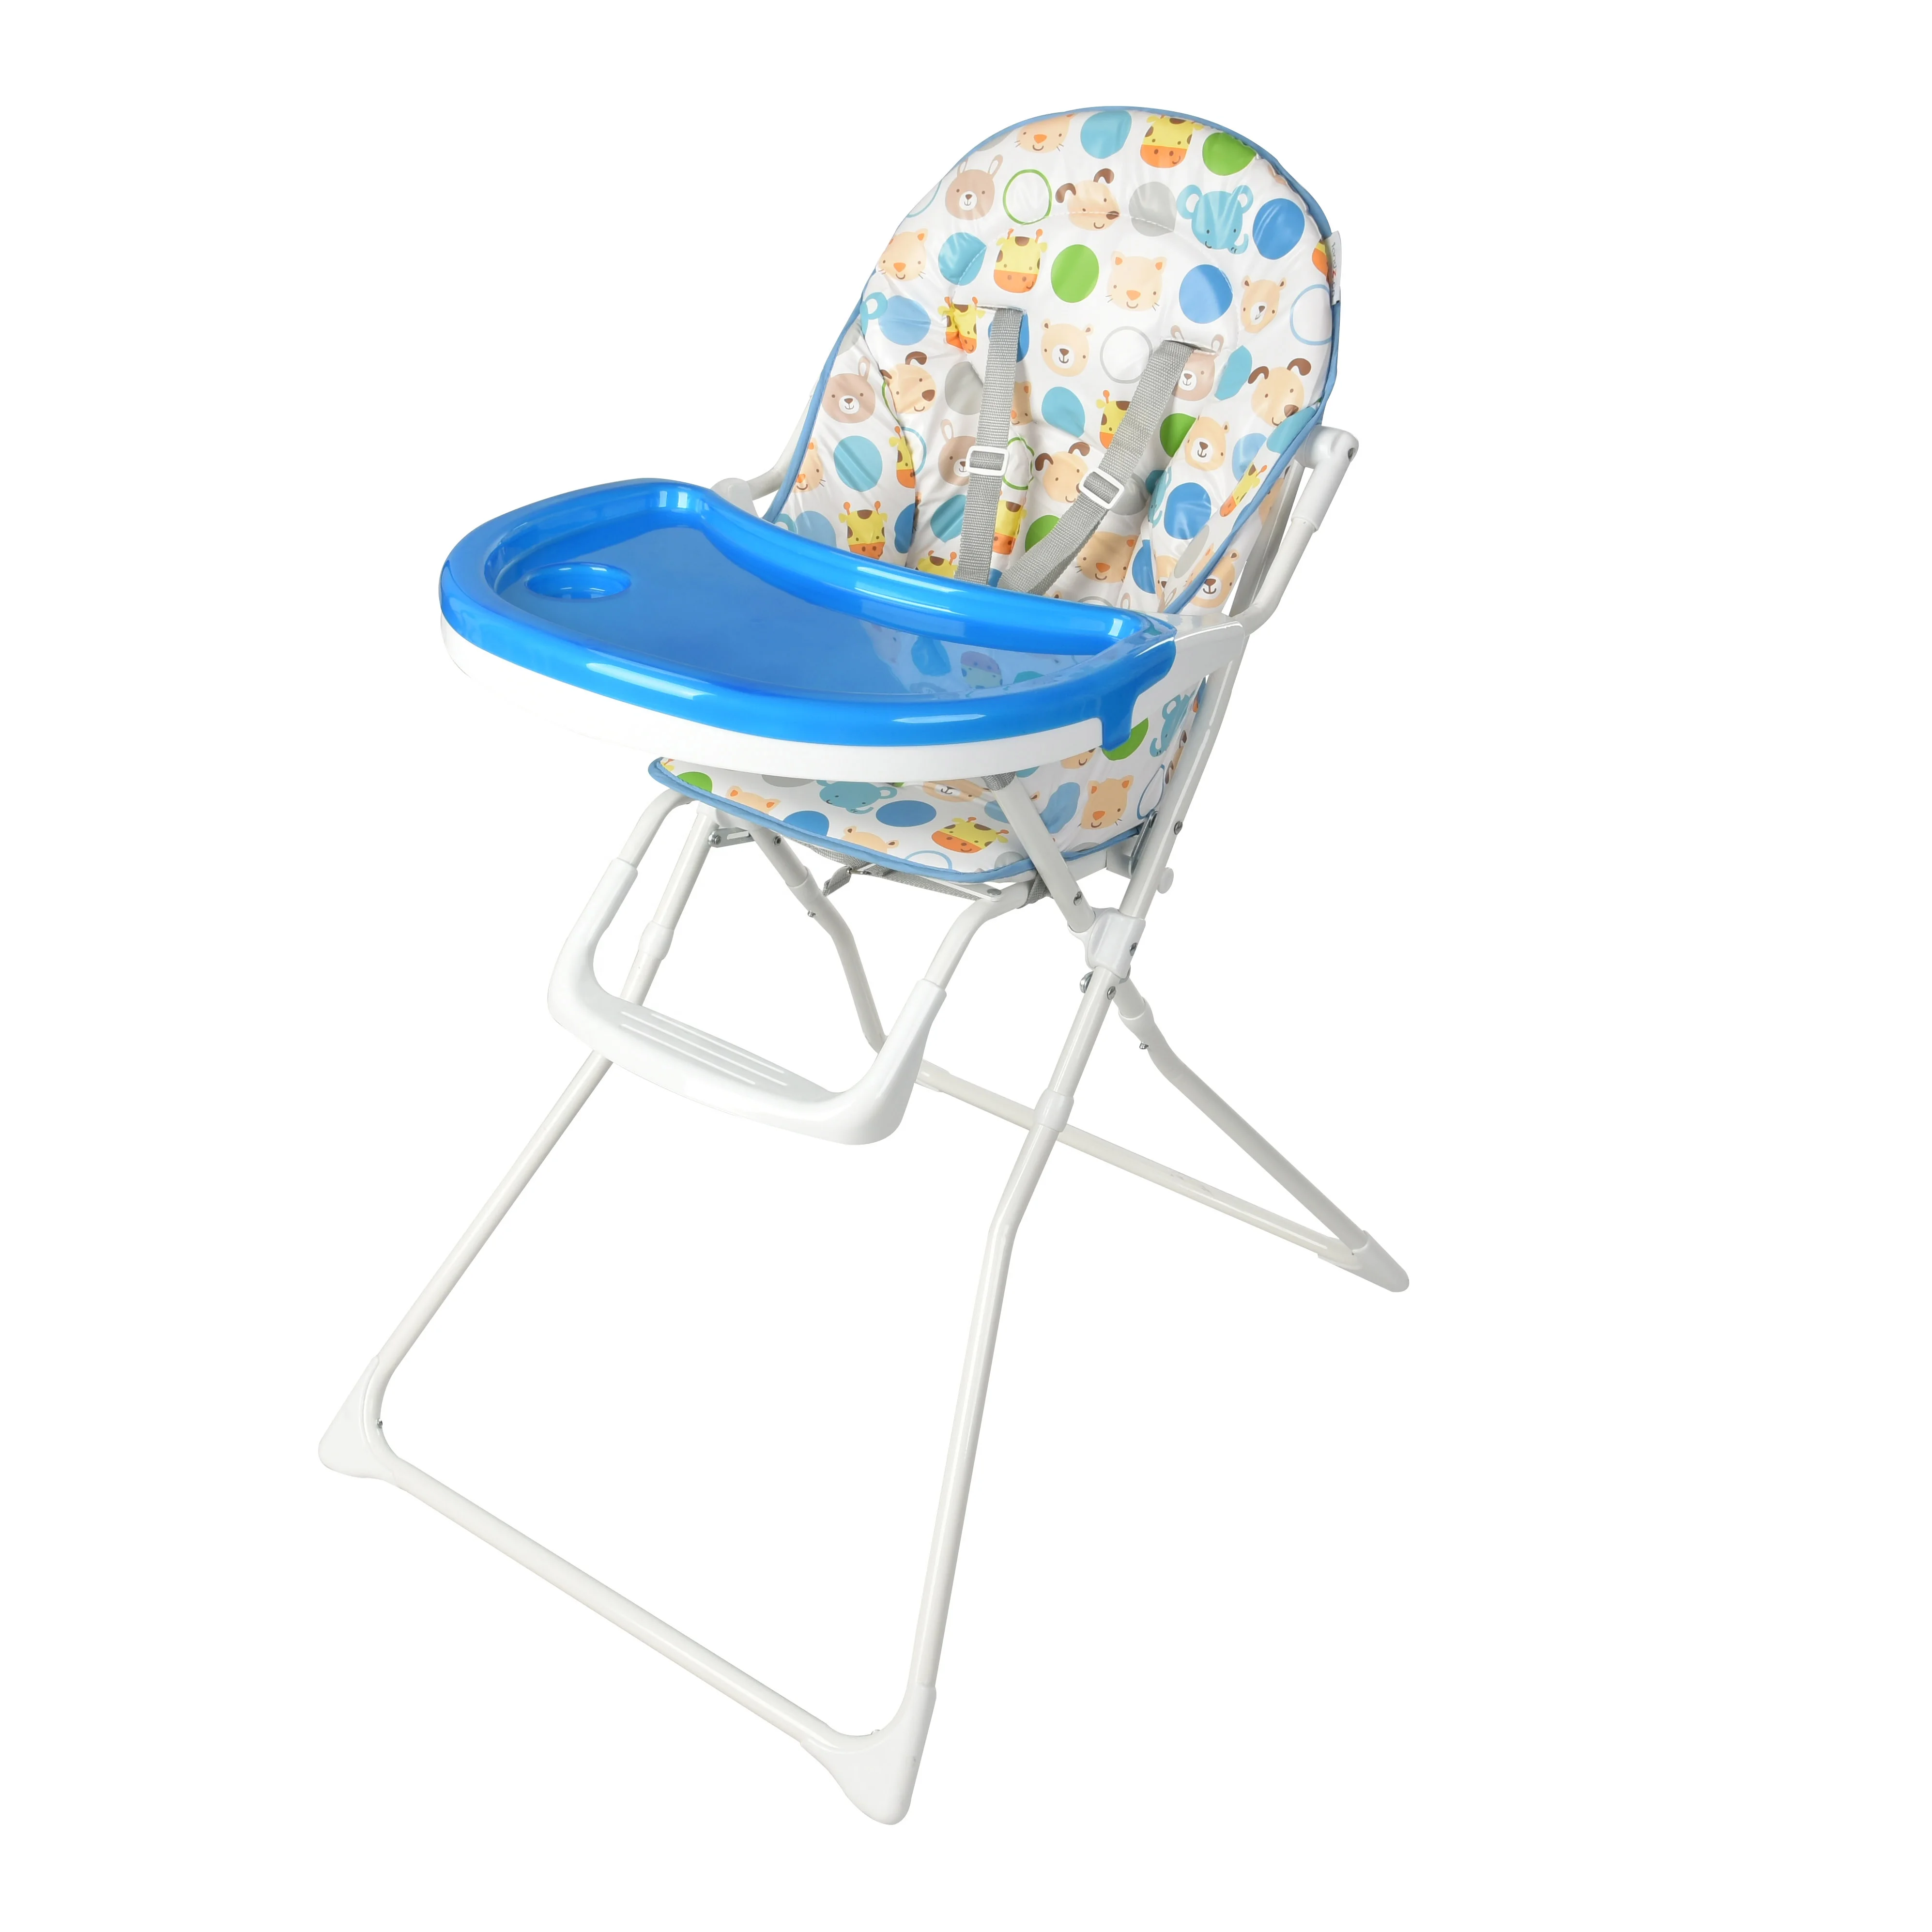 Hot Sale New Baby High Chair Multifunctional Plastic Simple Baby Feeding Chair Buy Plastic Baby High Chair